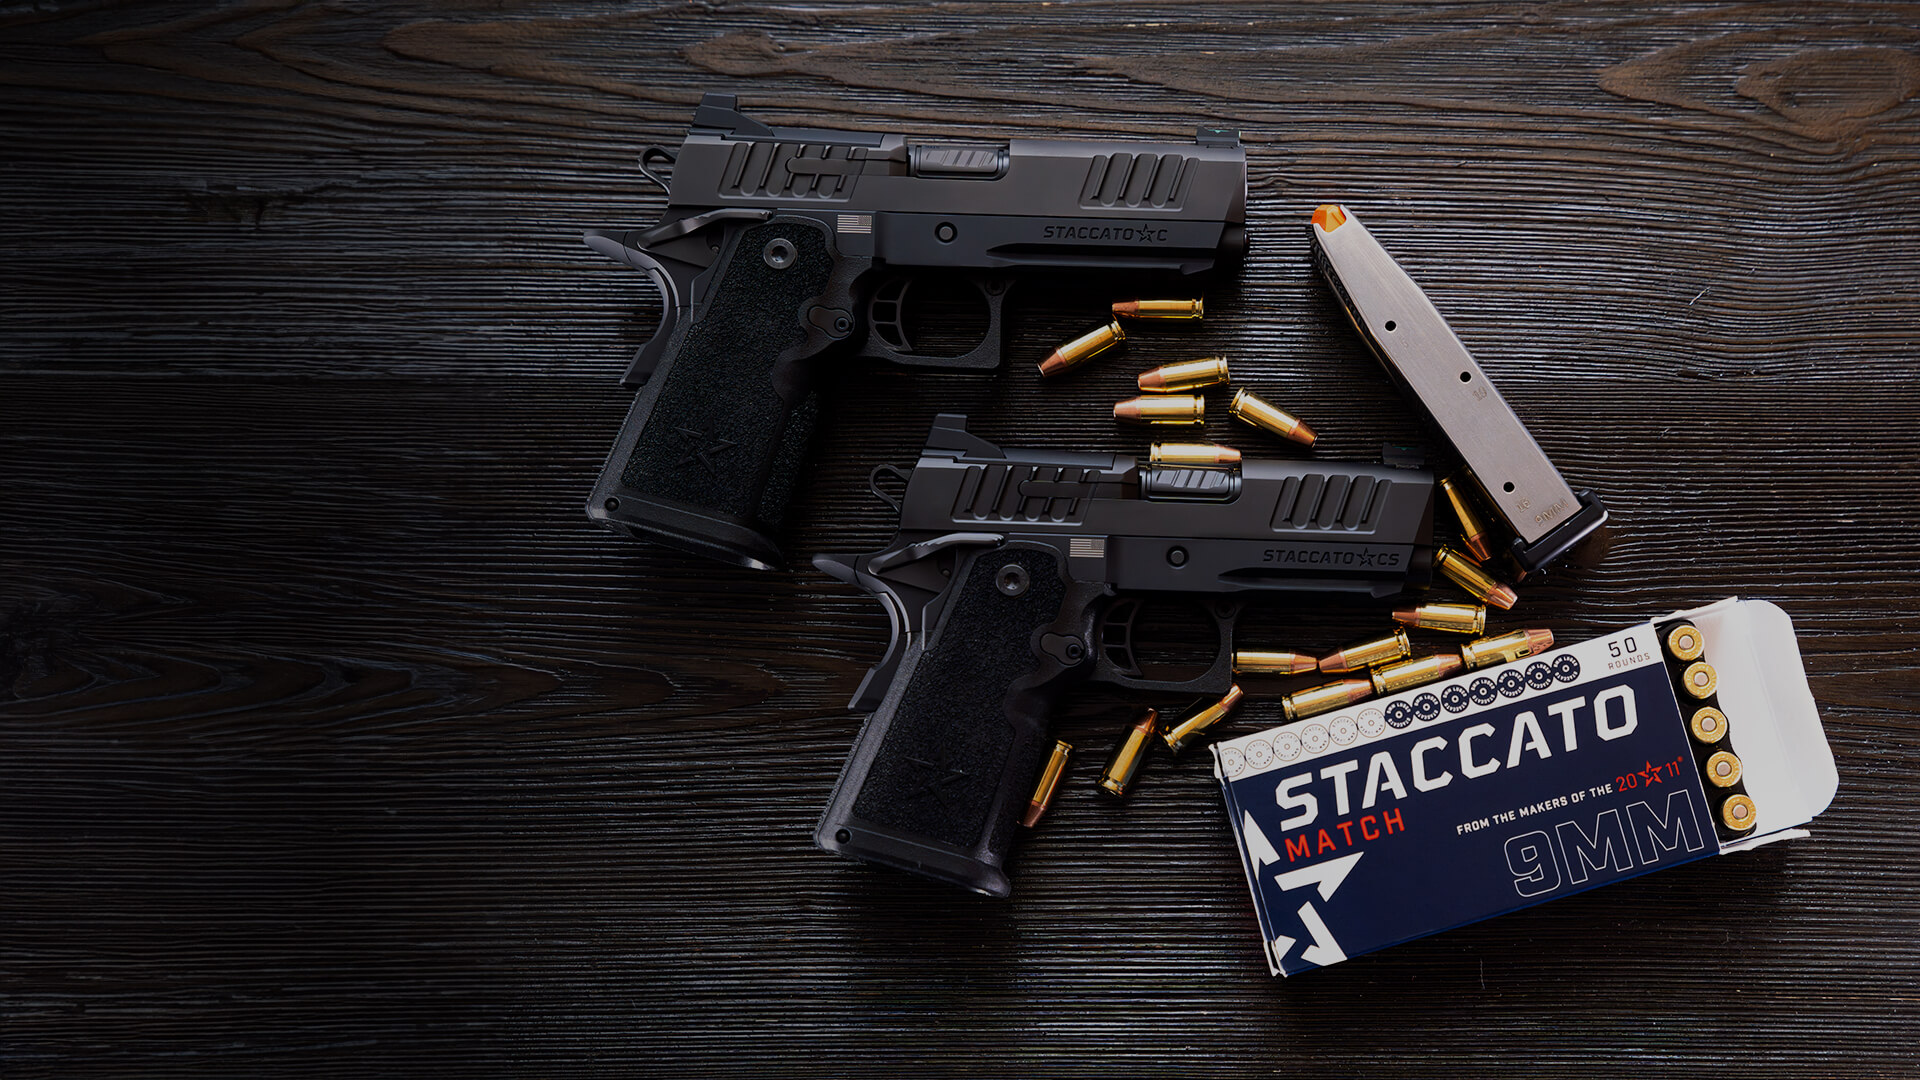 Staccato 2011 Handguns, Pistols, & Accessories. Built For Heroes. - Staccato  2011